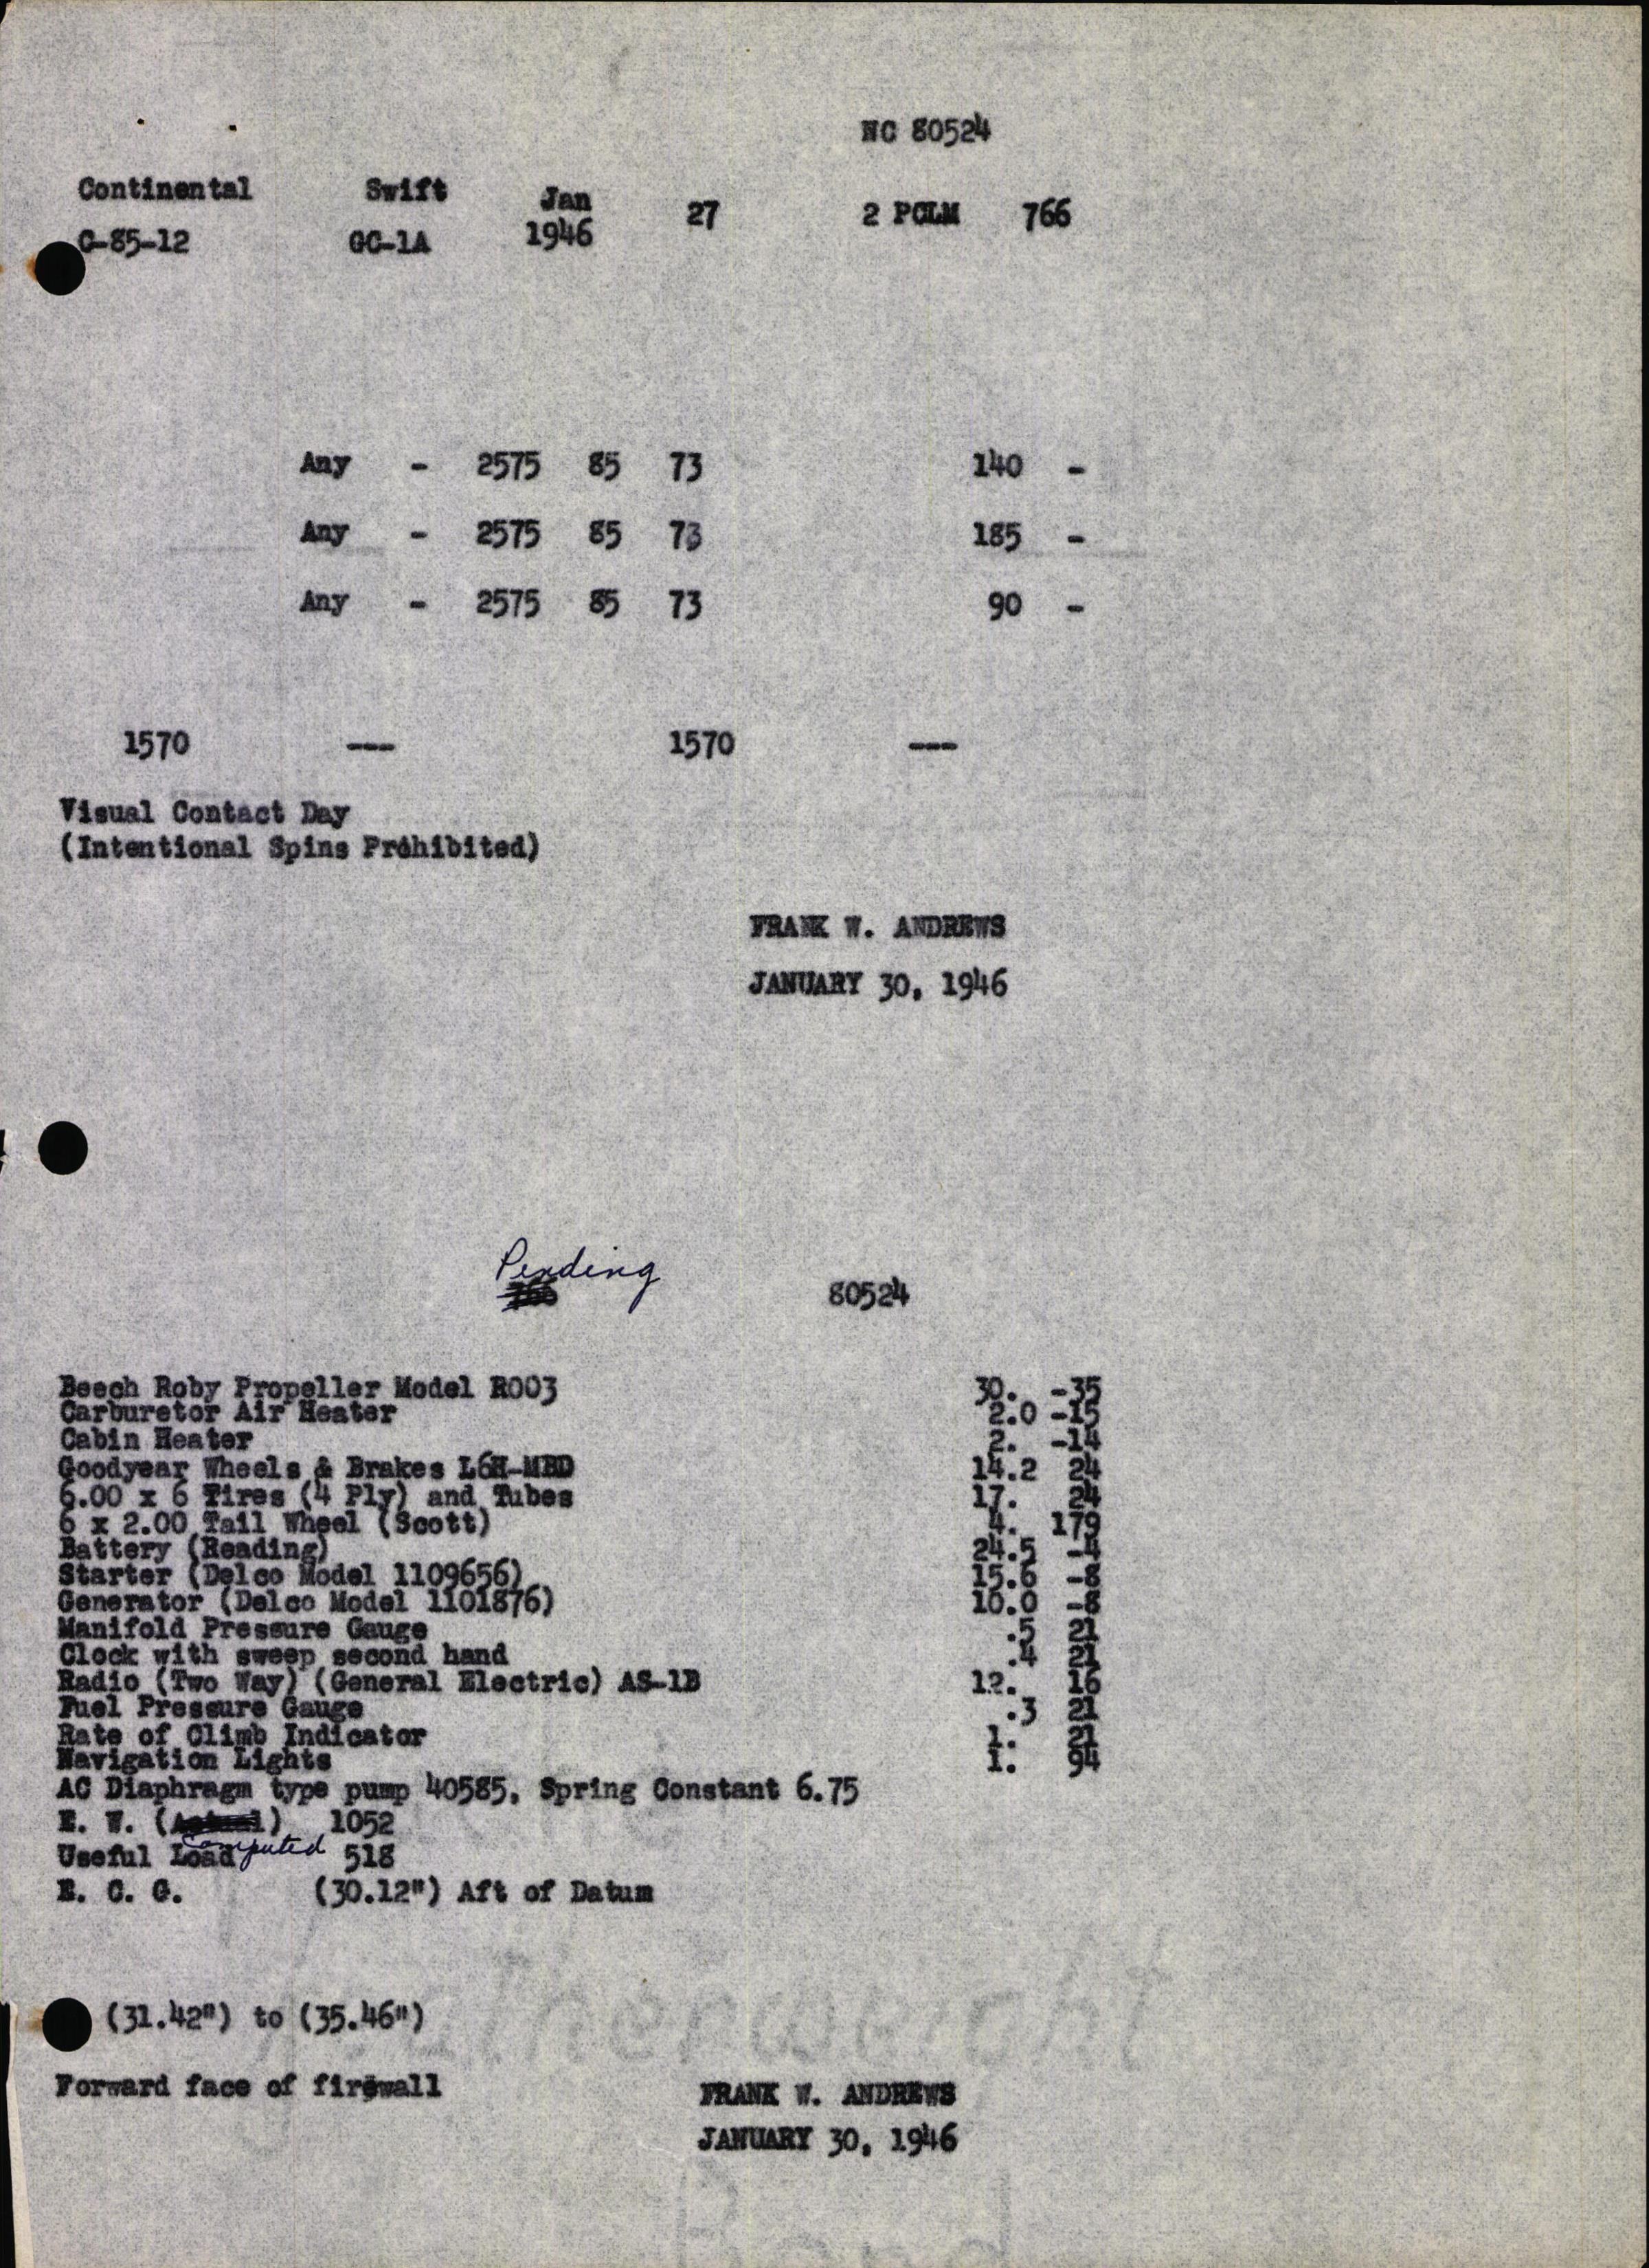 Sample page 5 from AirCorps Library document: Technical Information for Serial Number 27